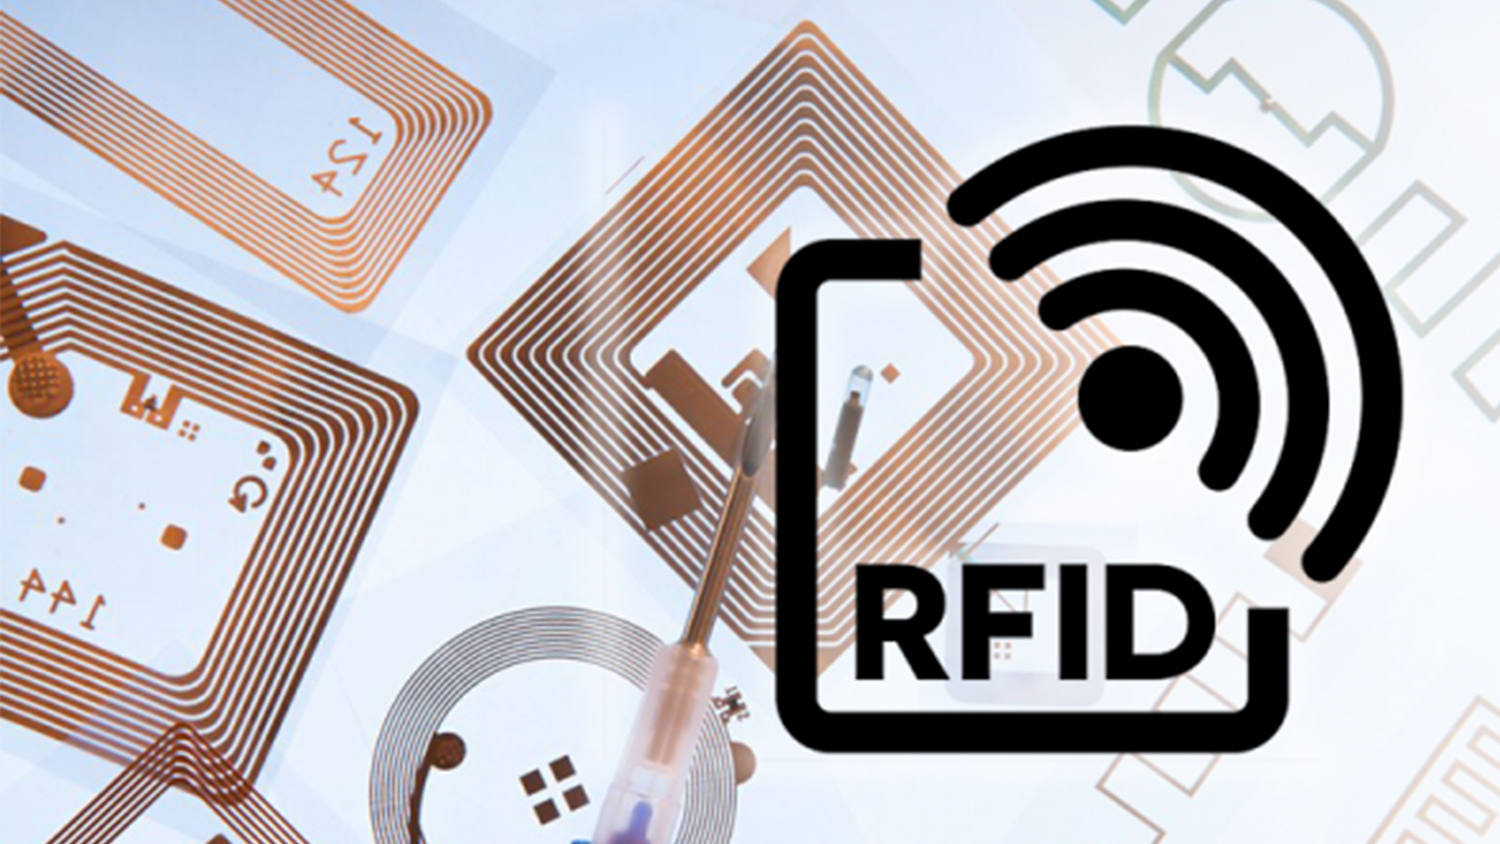 Everything you need to know about RFID technology - Labtag Blog